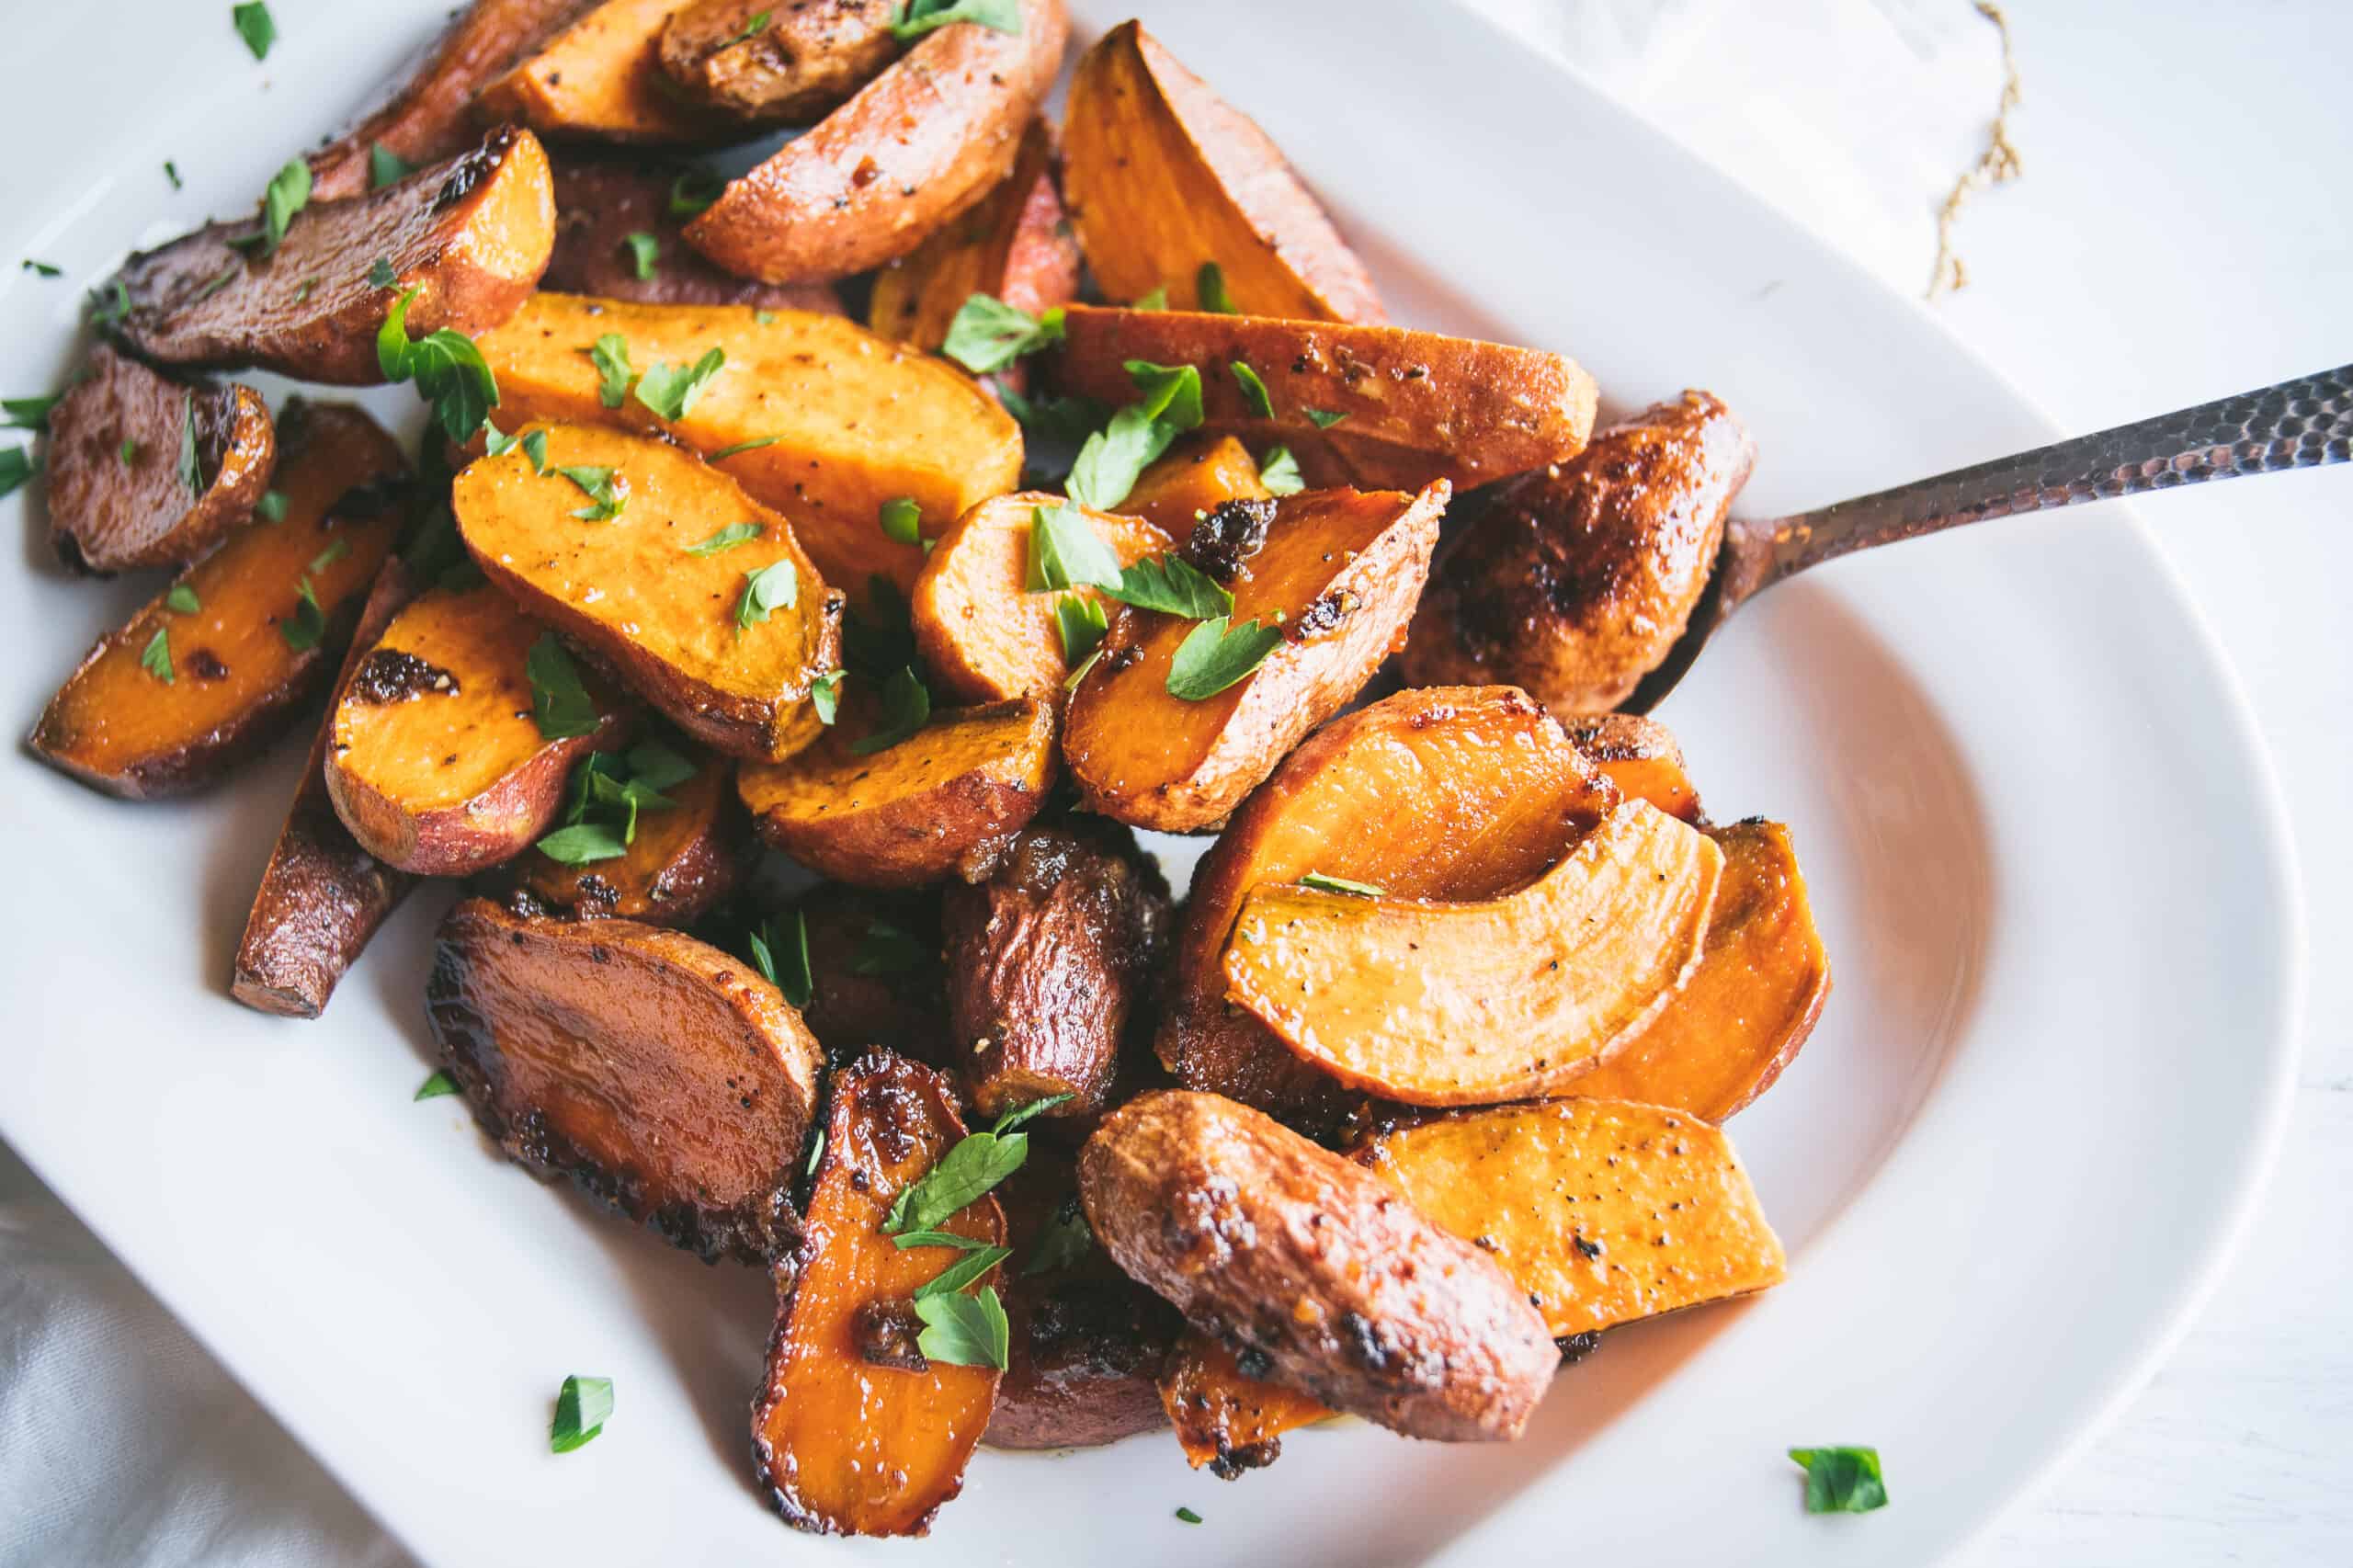 Roasted sweet potato fingerling halves on a platter with chopped parsley garnished on top.